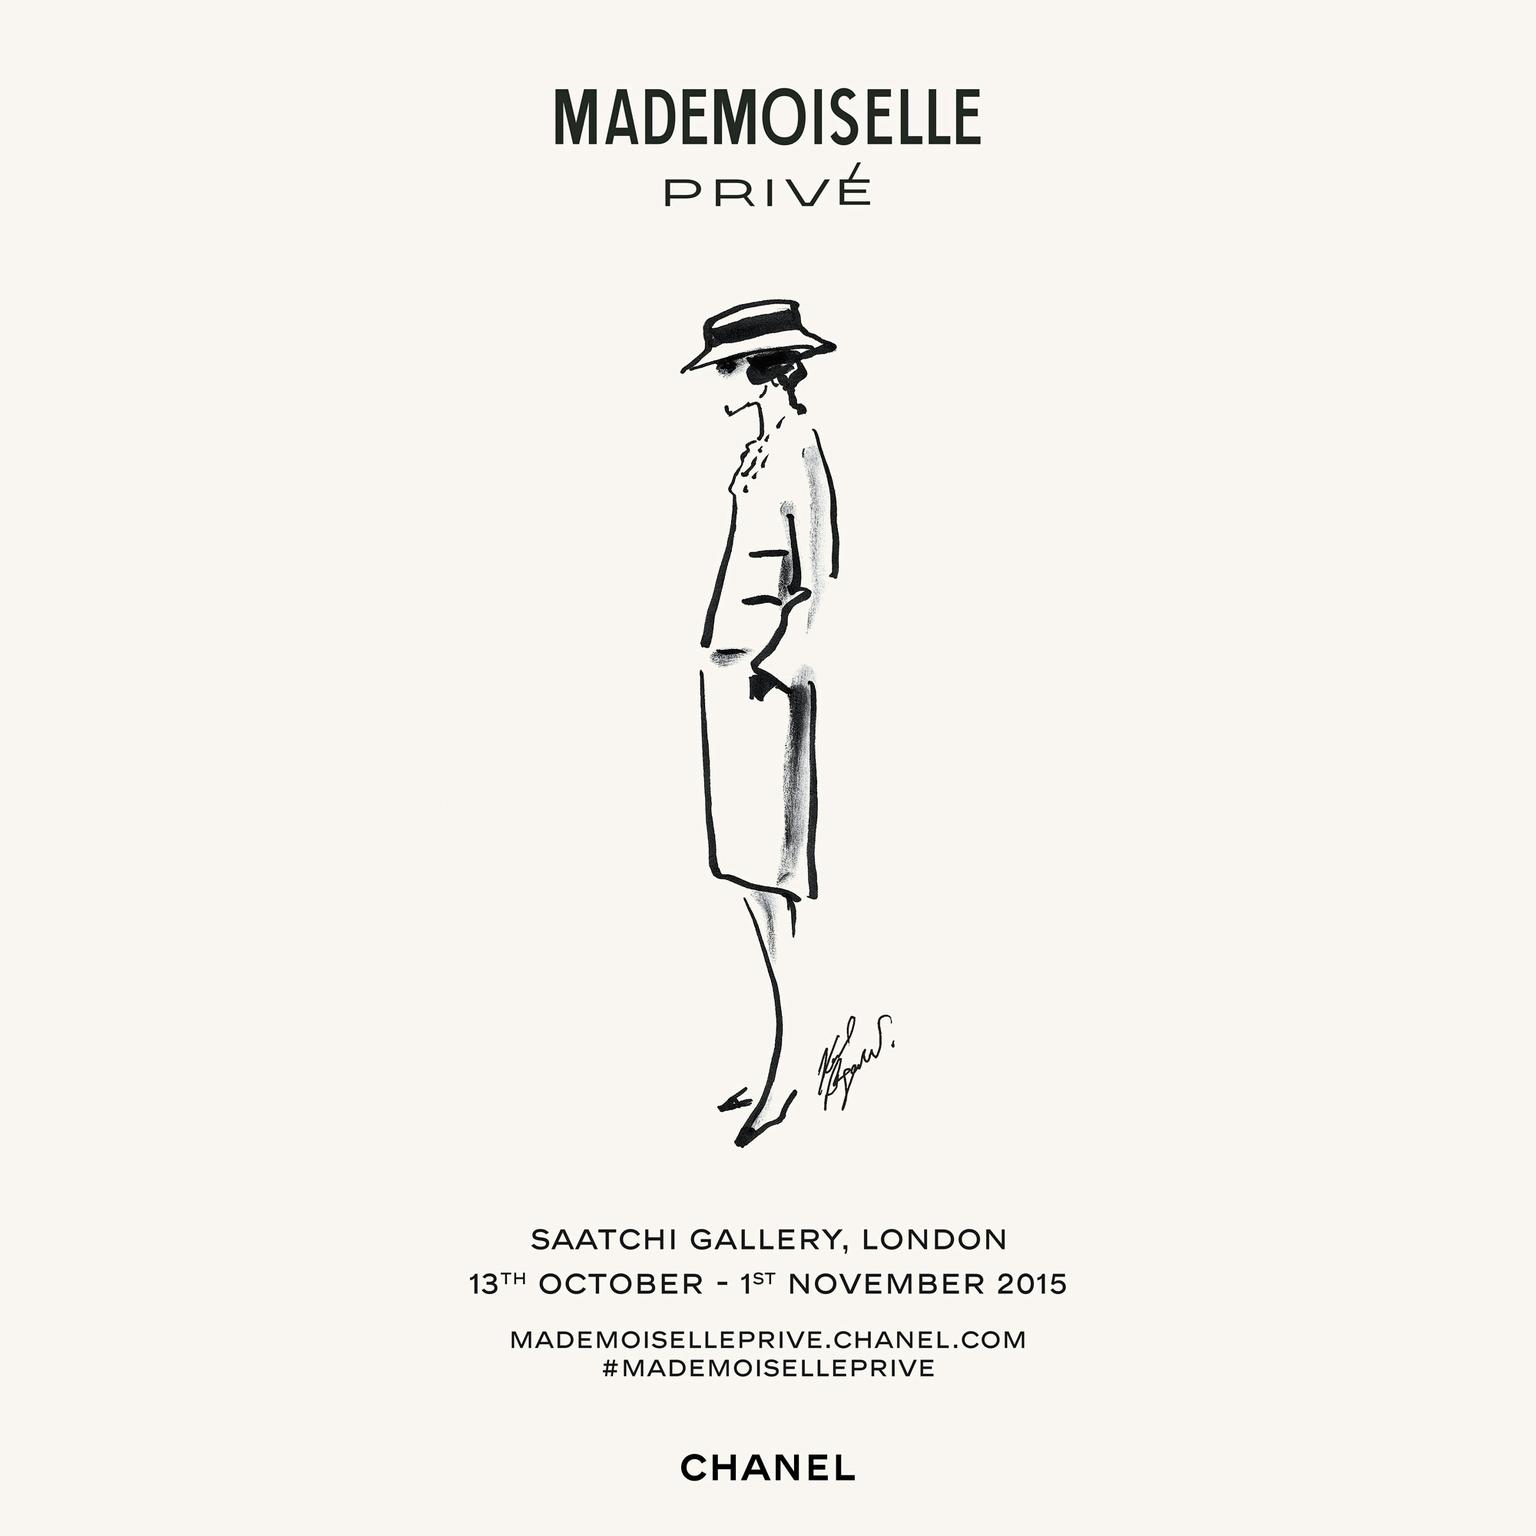 Affiche Chanel Mademoiselle Privé poster